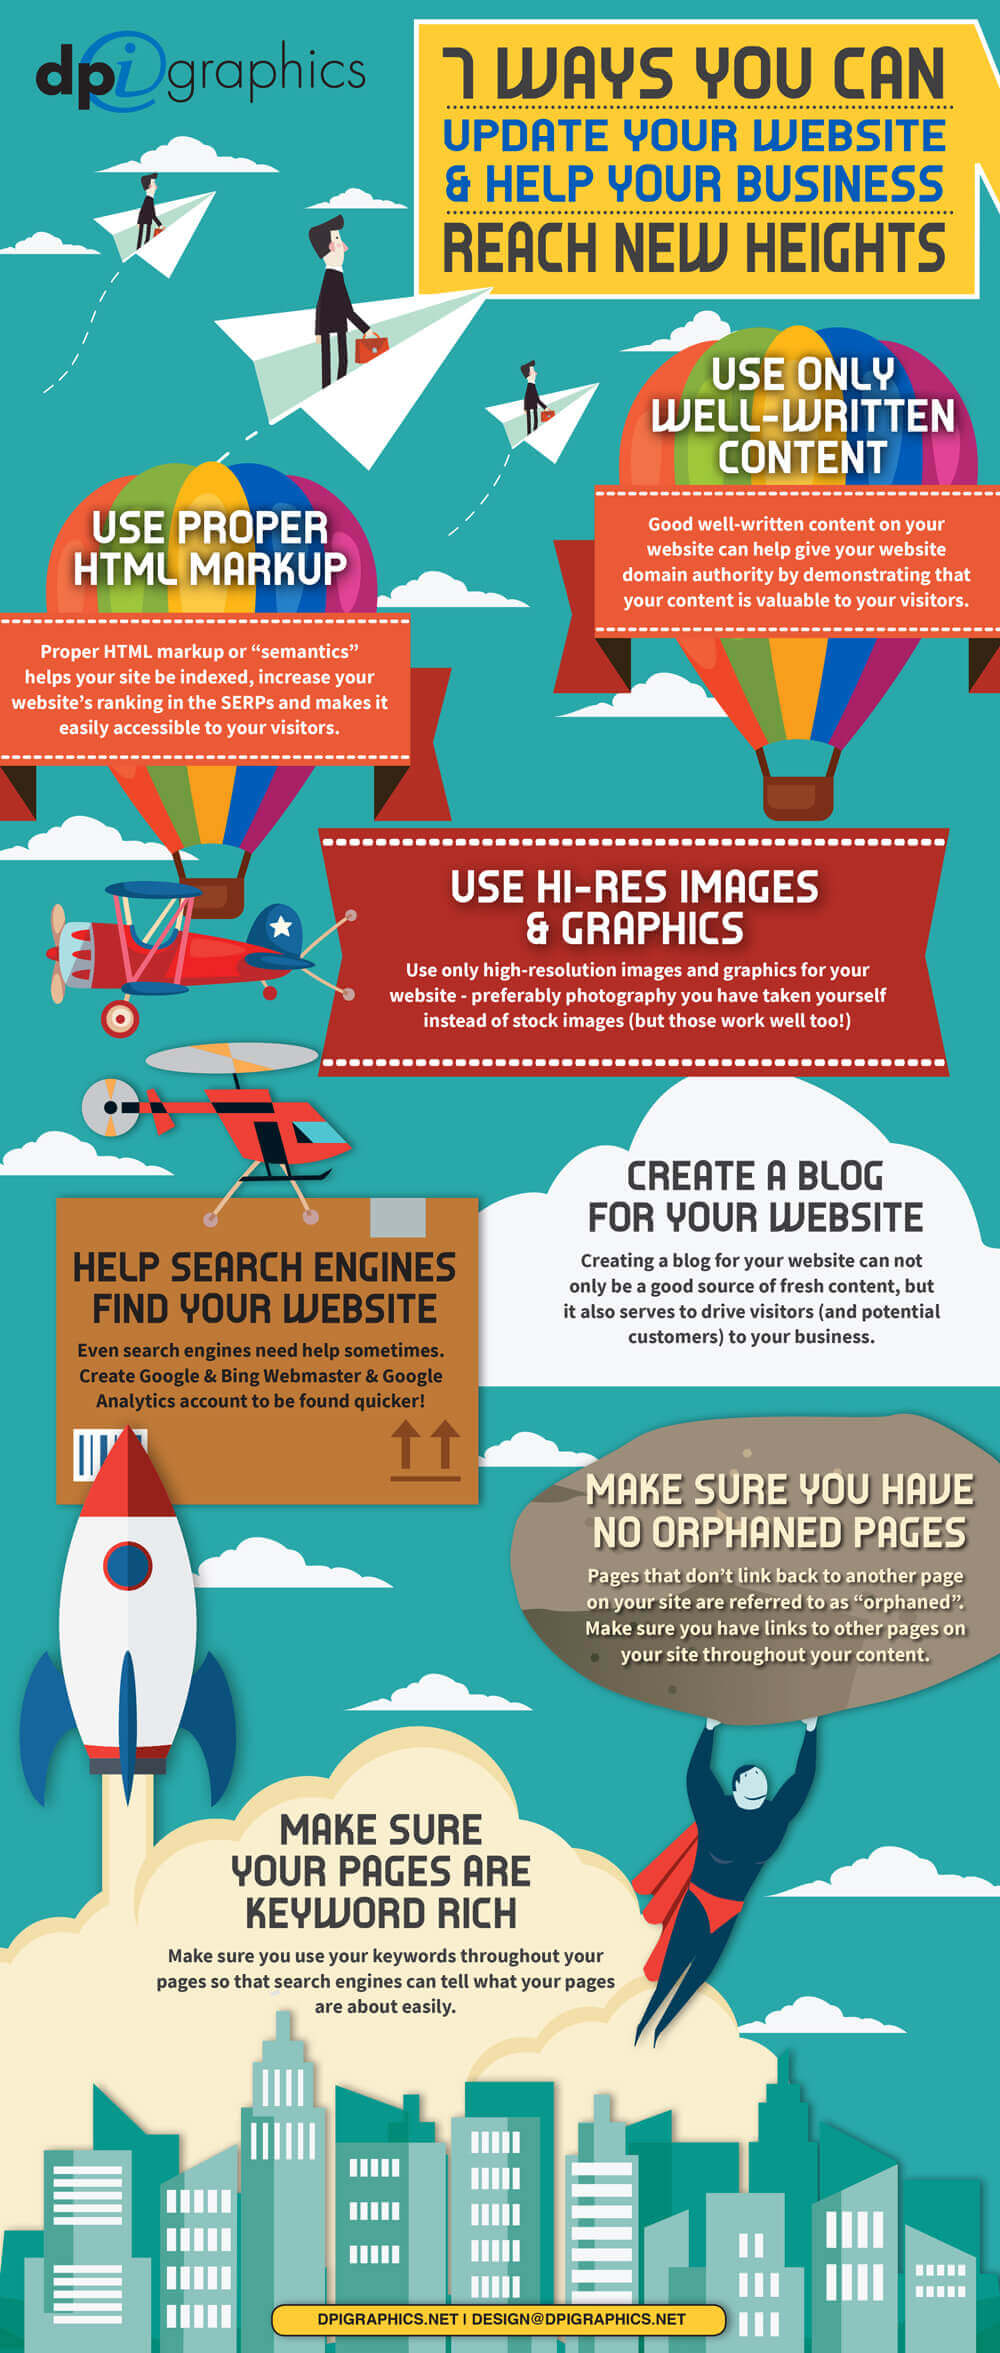 7 Ways to Update Your Website and Help Your Business Reach New Heights